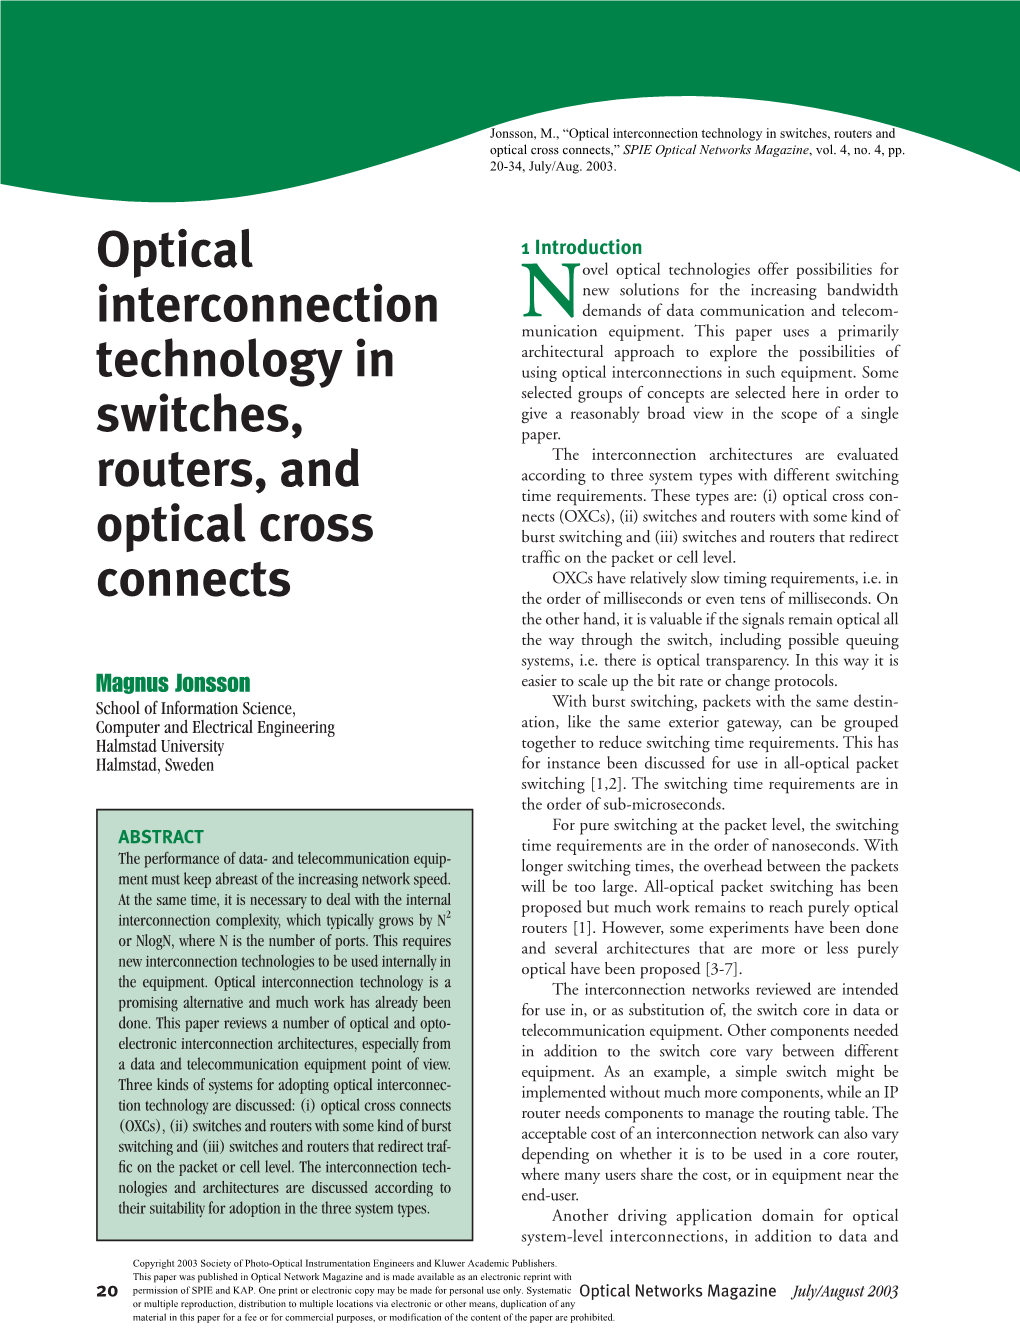 Optical Interconnection Technology in Switches, Routers, and Optical Cross